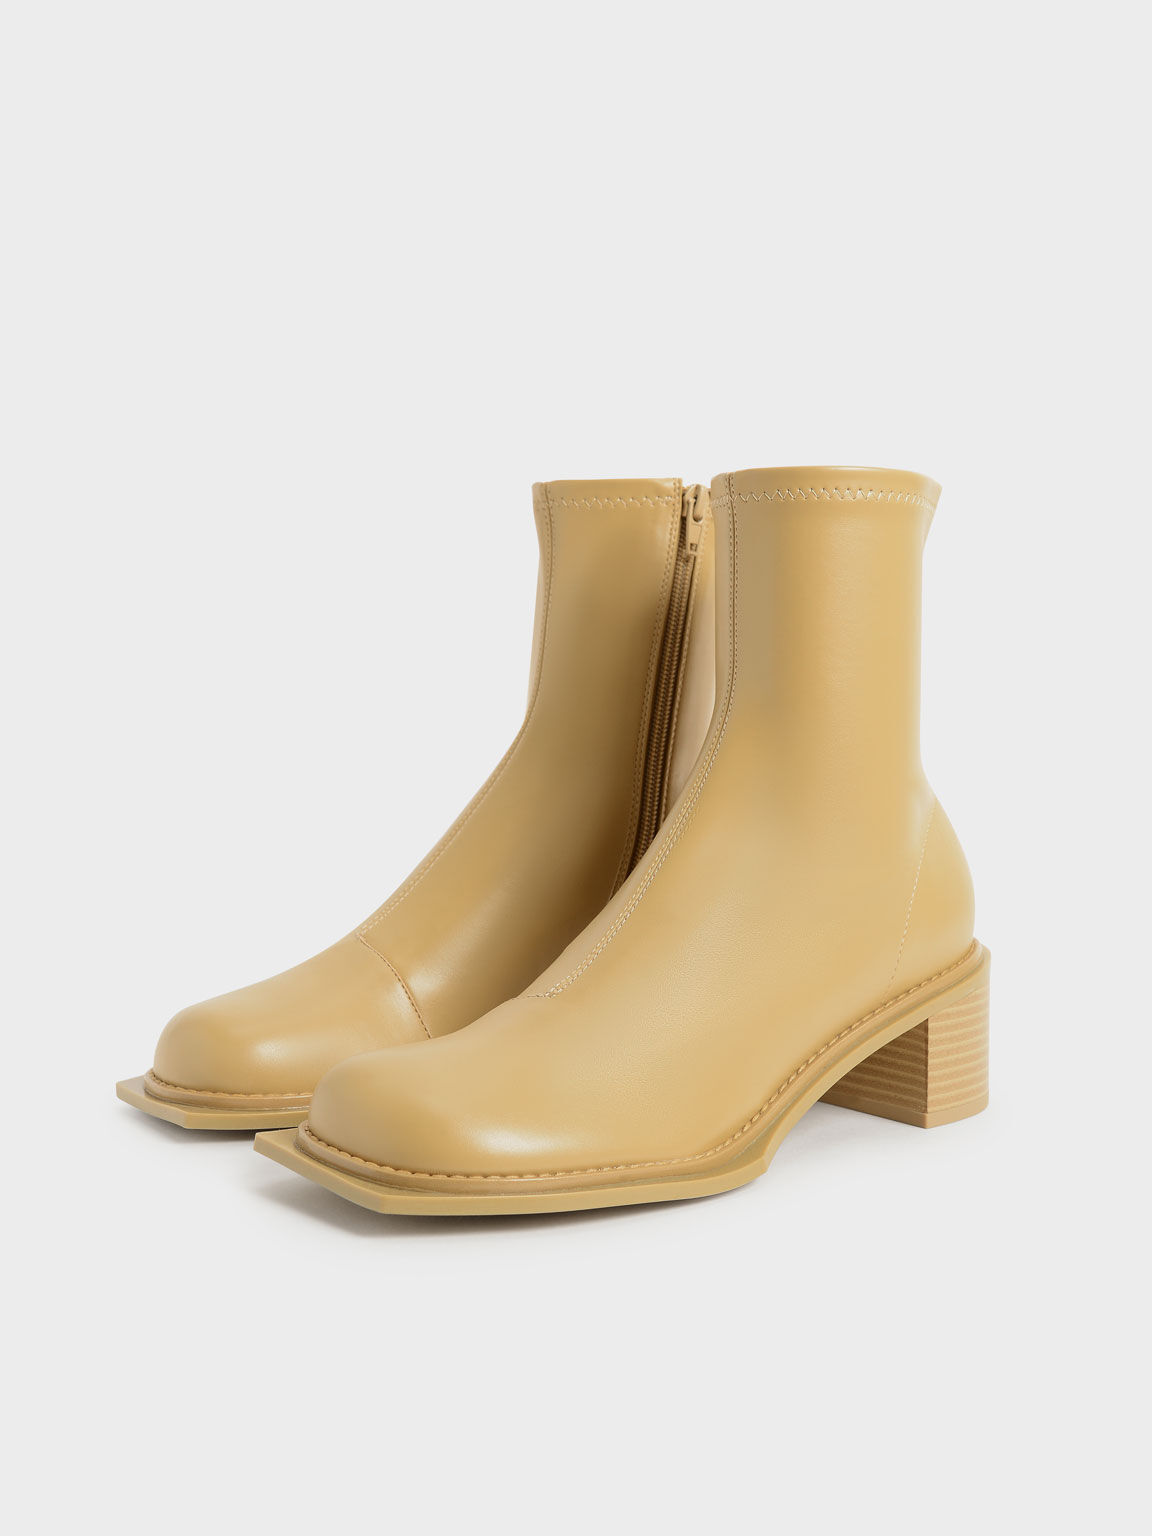 Bee Stitch-Trim Ankle Boots, Sand, hi-res